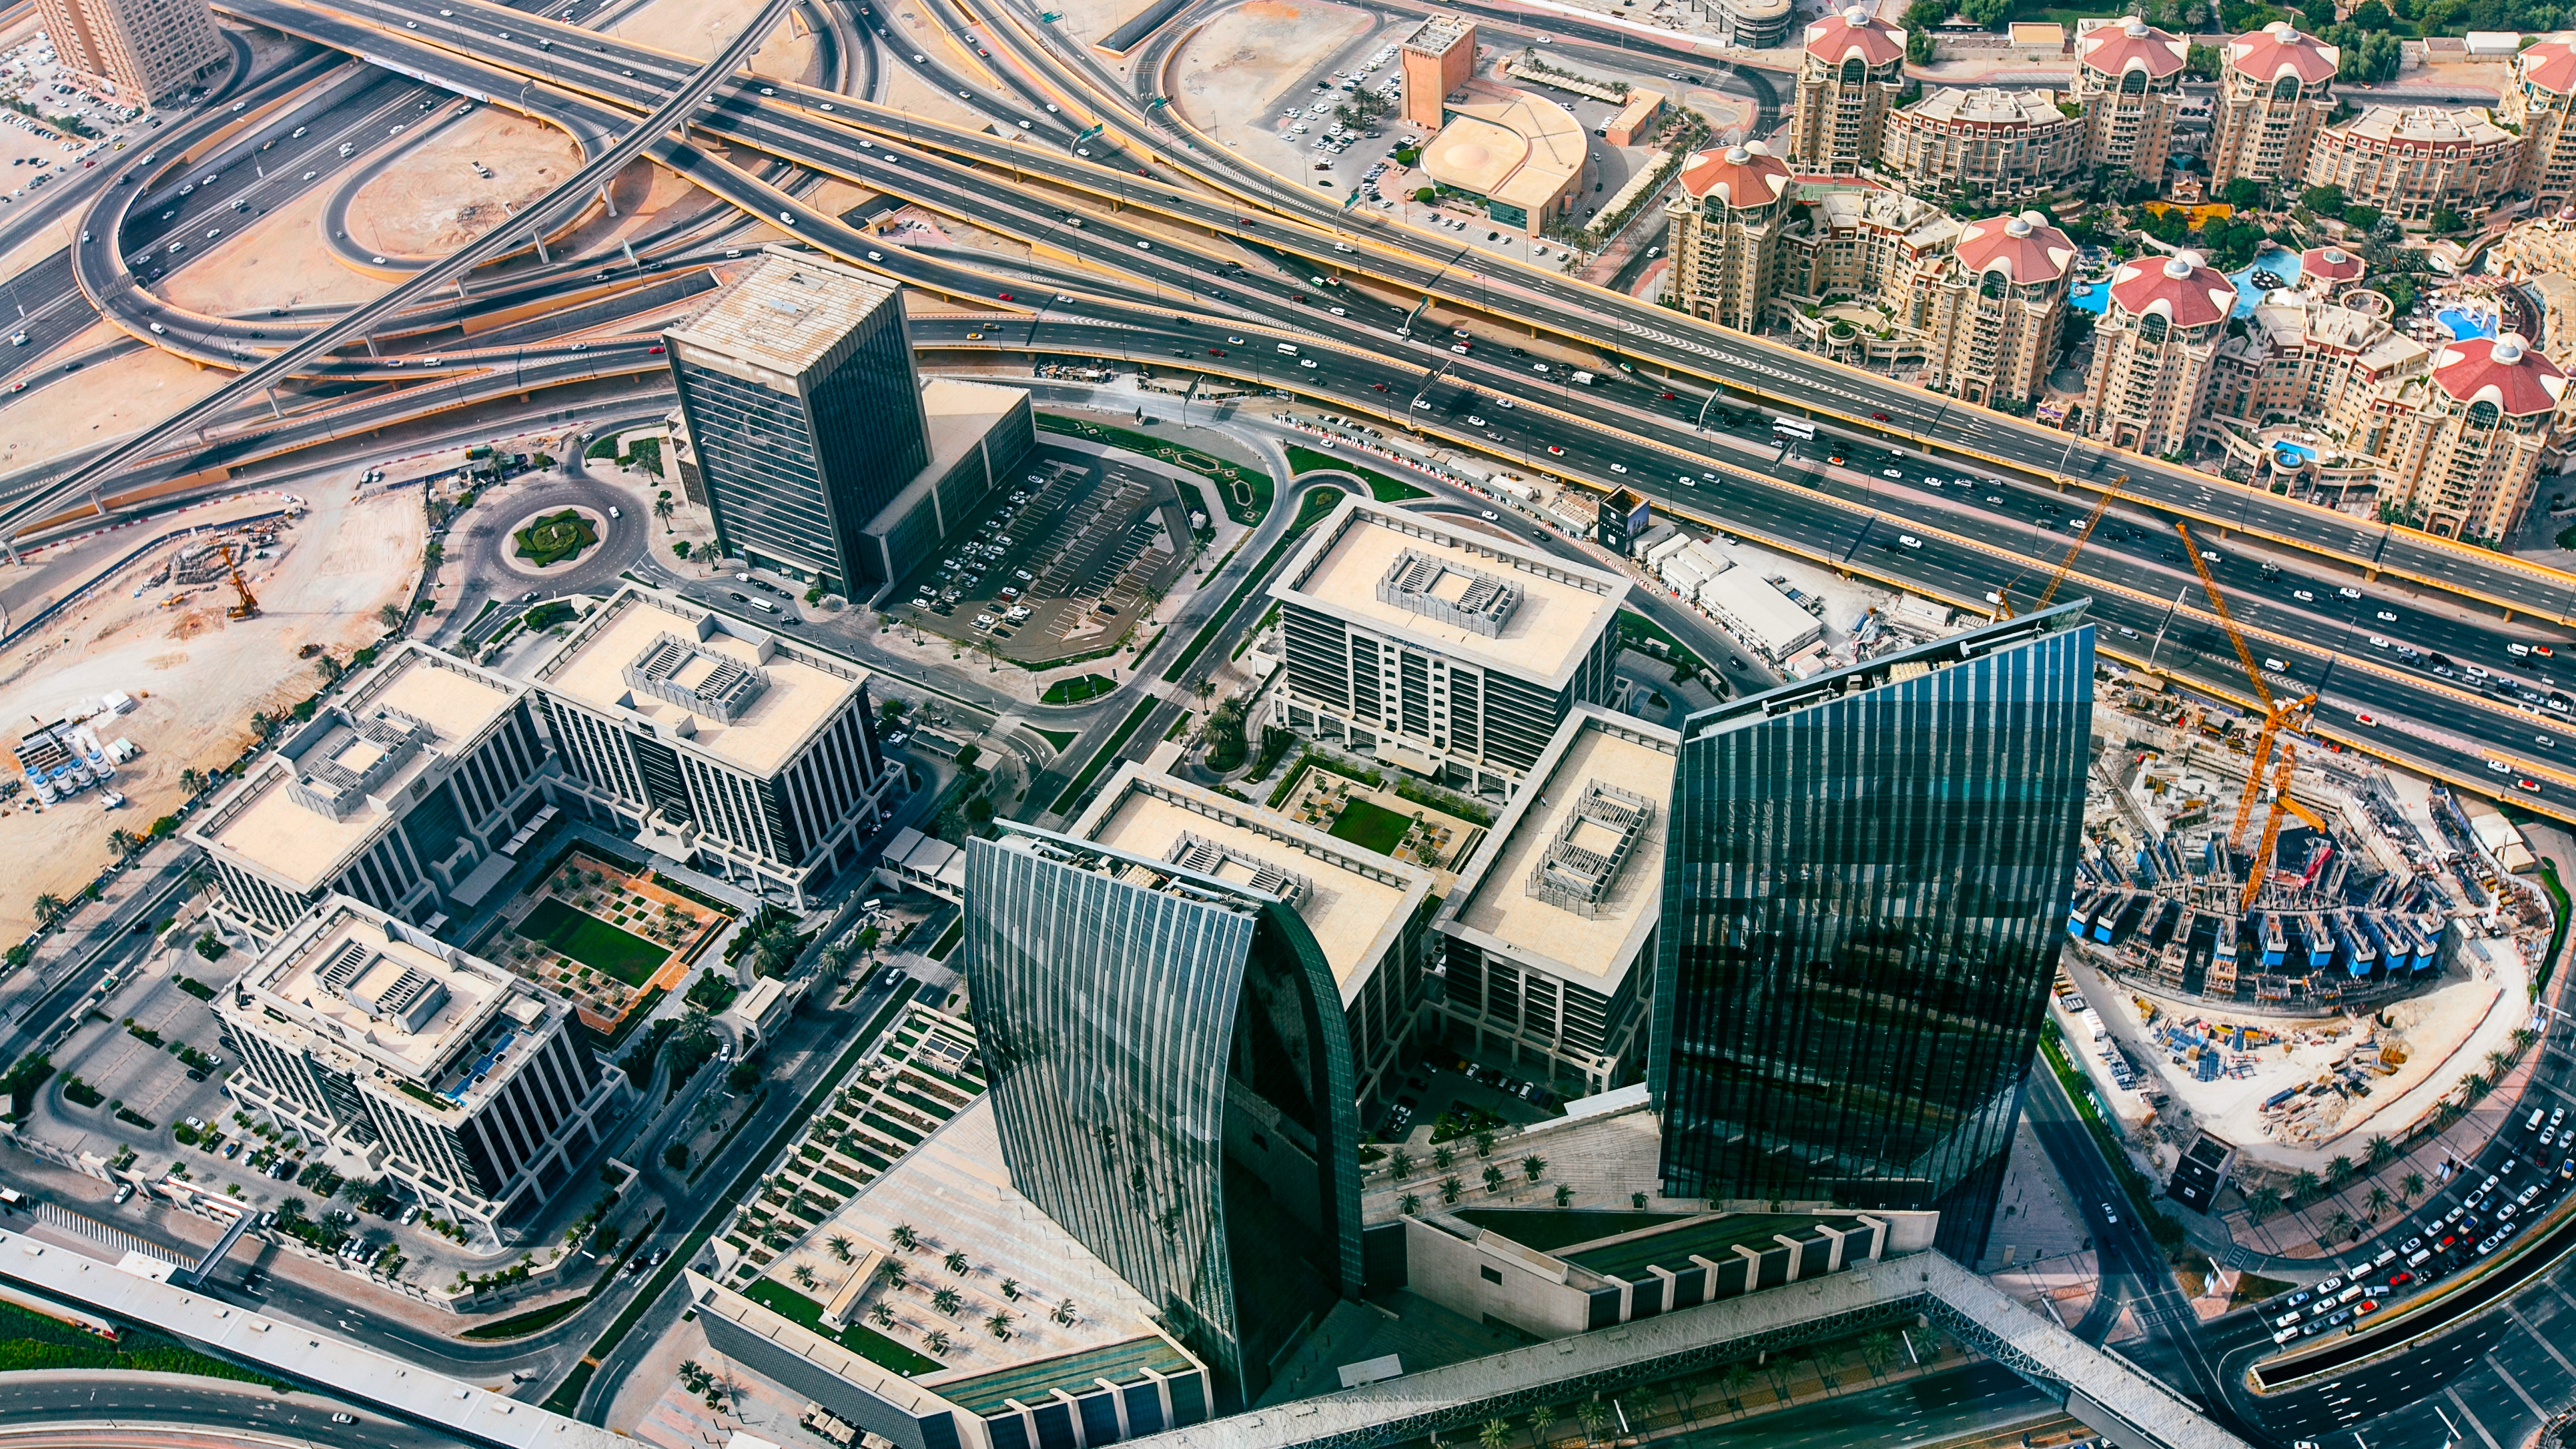 View from above of Dubai, United Arab Emirates including buildings and roads